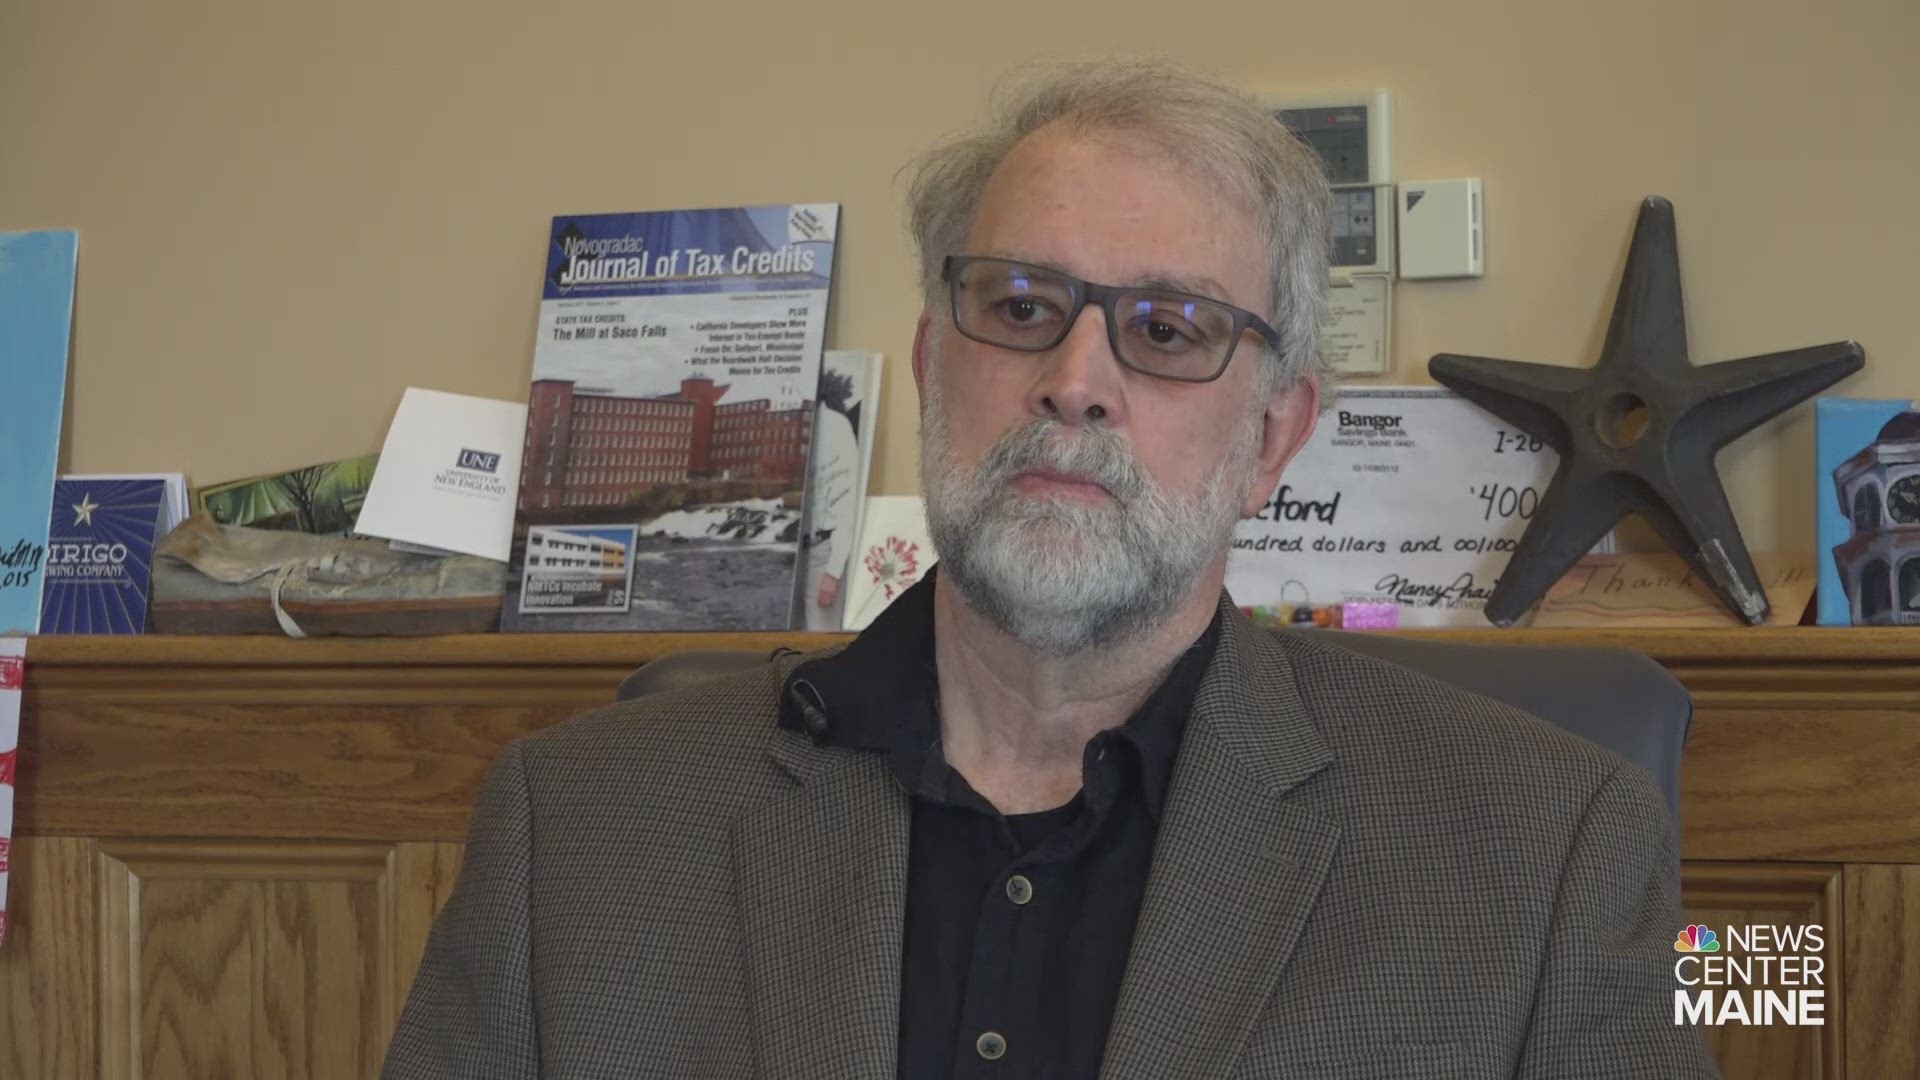 Mayor Alan Casavant says the old mill town is reinventing itself by accommodating local businesses.